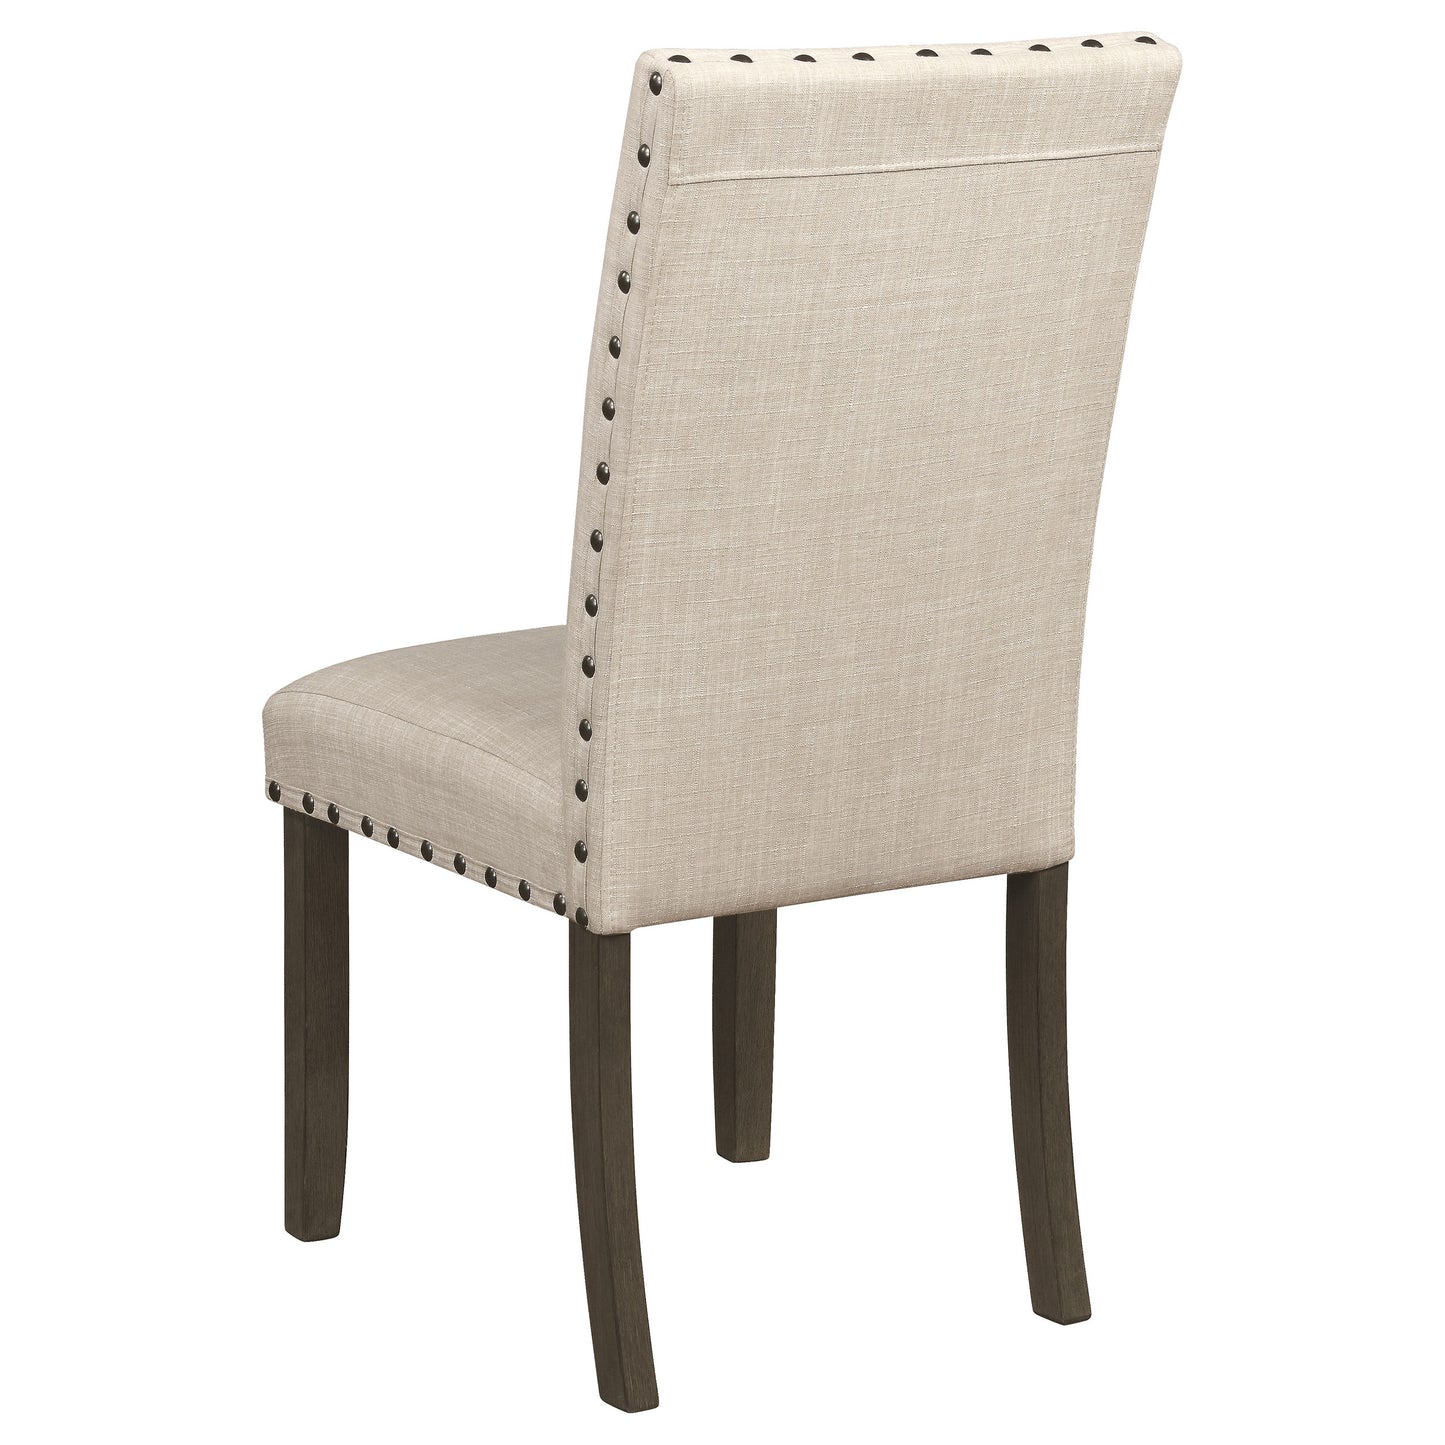 Ralland Upholstered Side Chairs Beige and Rustic Brown (Set of 2)